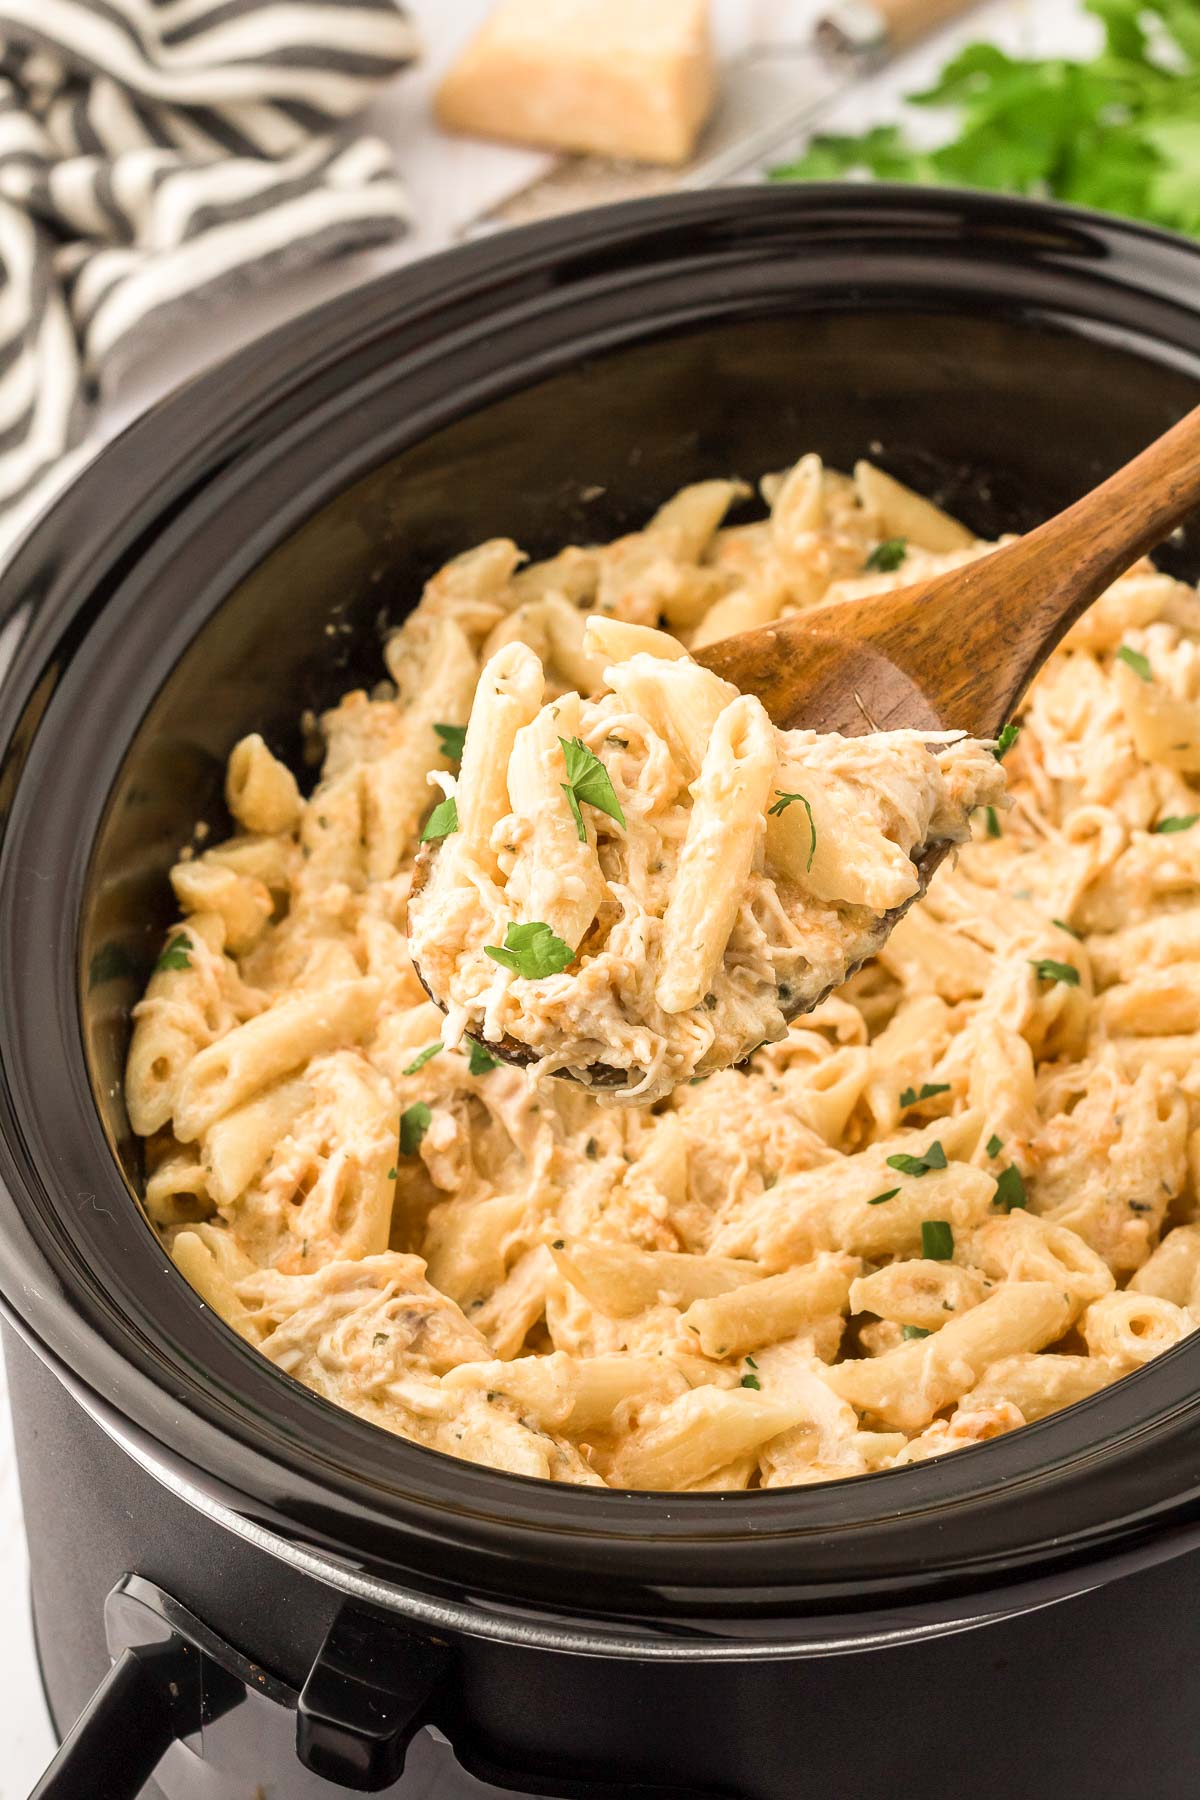 A wooden spoon scooping garlic chicken pasta out of a crockpot.